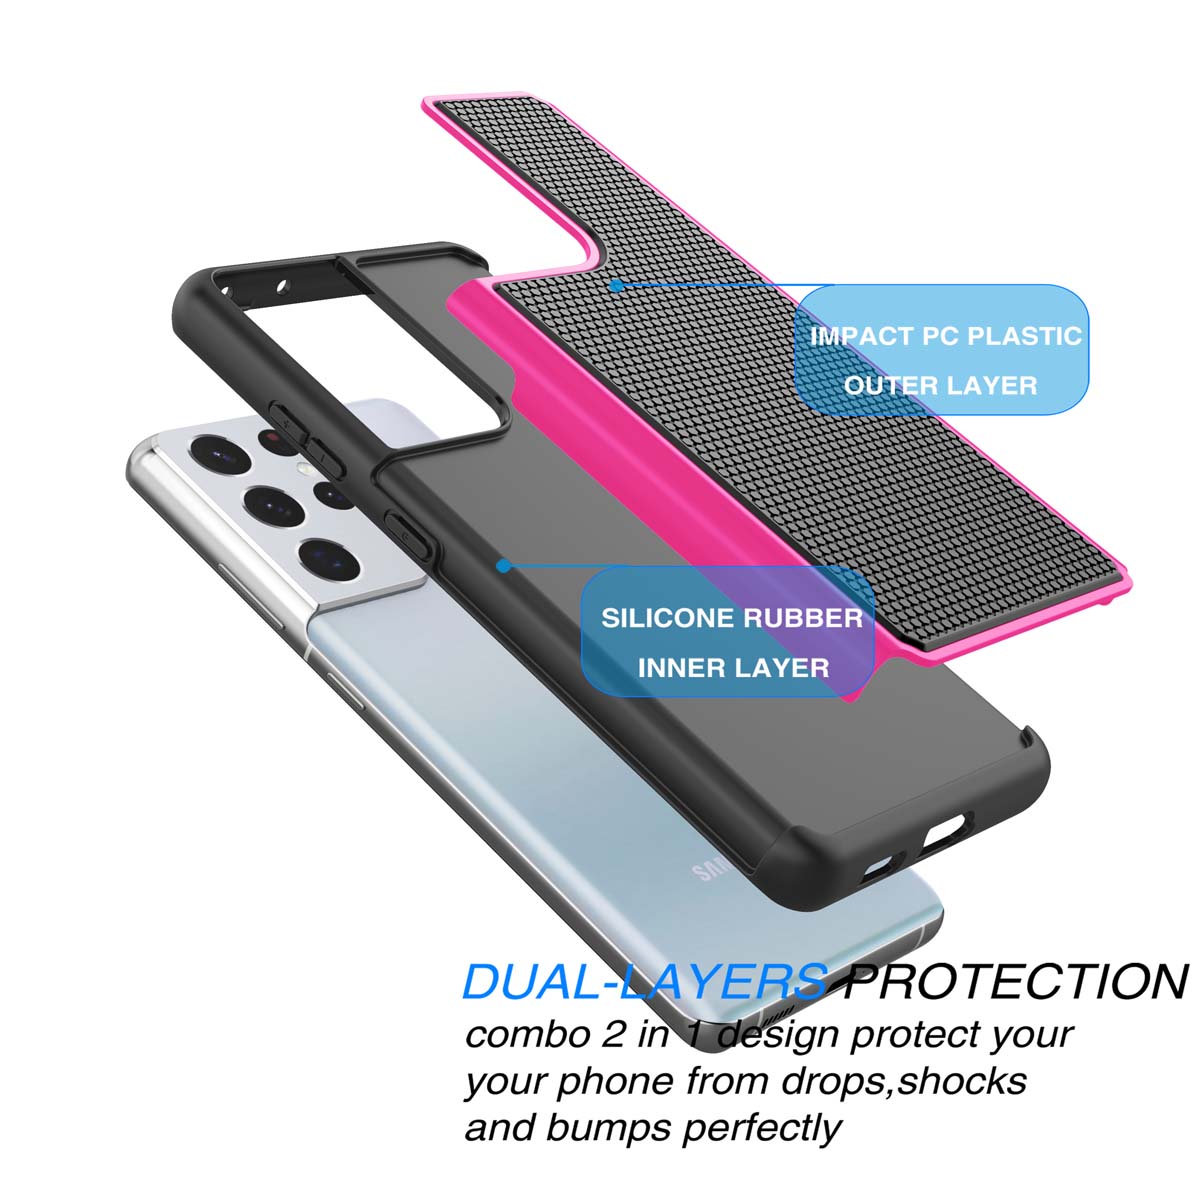 Galaxy S21 Ultra Case, Cute Case for Galaxy S21 Ultra 6.8", Njjex Shock Absorbing Dual Layer Silicone & Plastic Bumper Rugged Grip Hard Protective Cases Cover for Samsung Galaxy S21 Ultra 5G 2020 - image 5 of 9